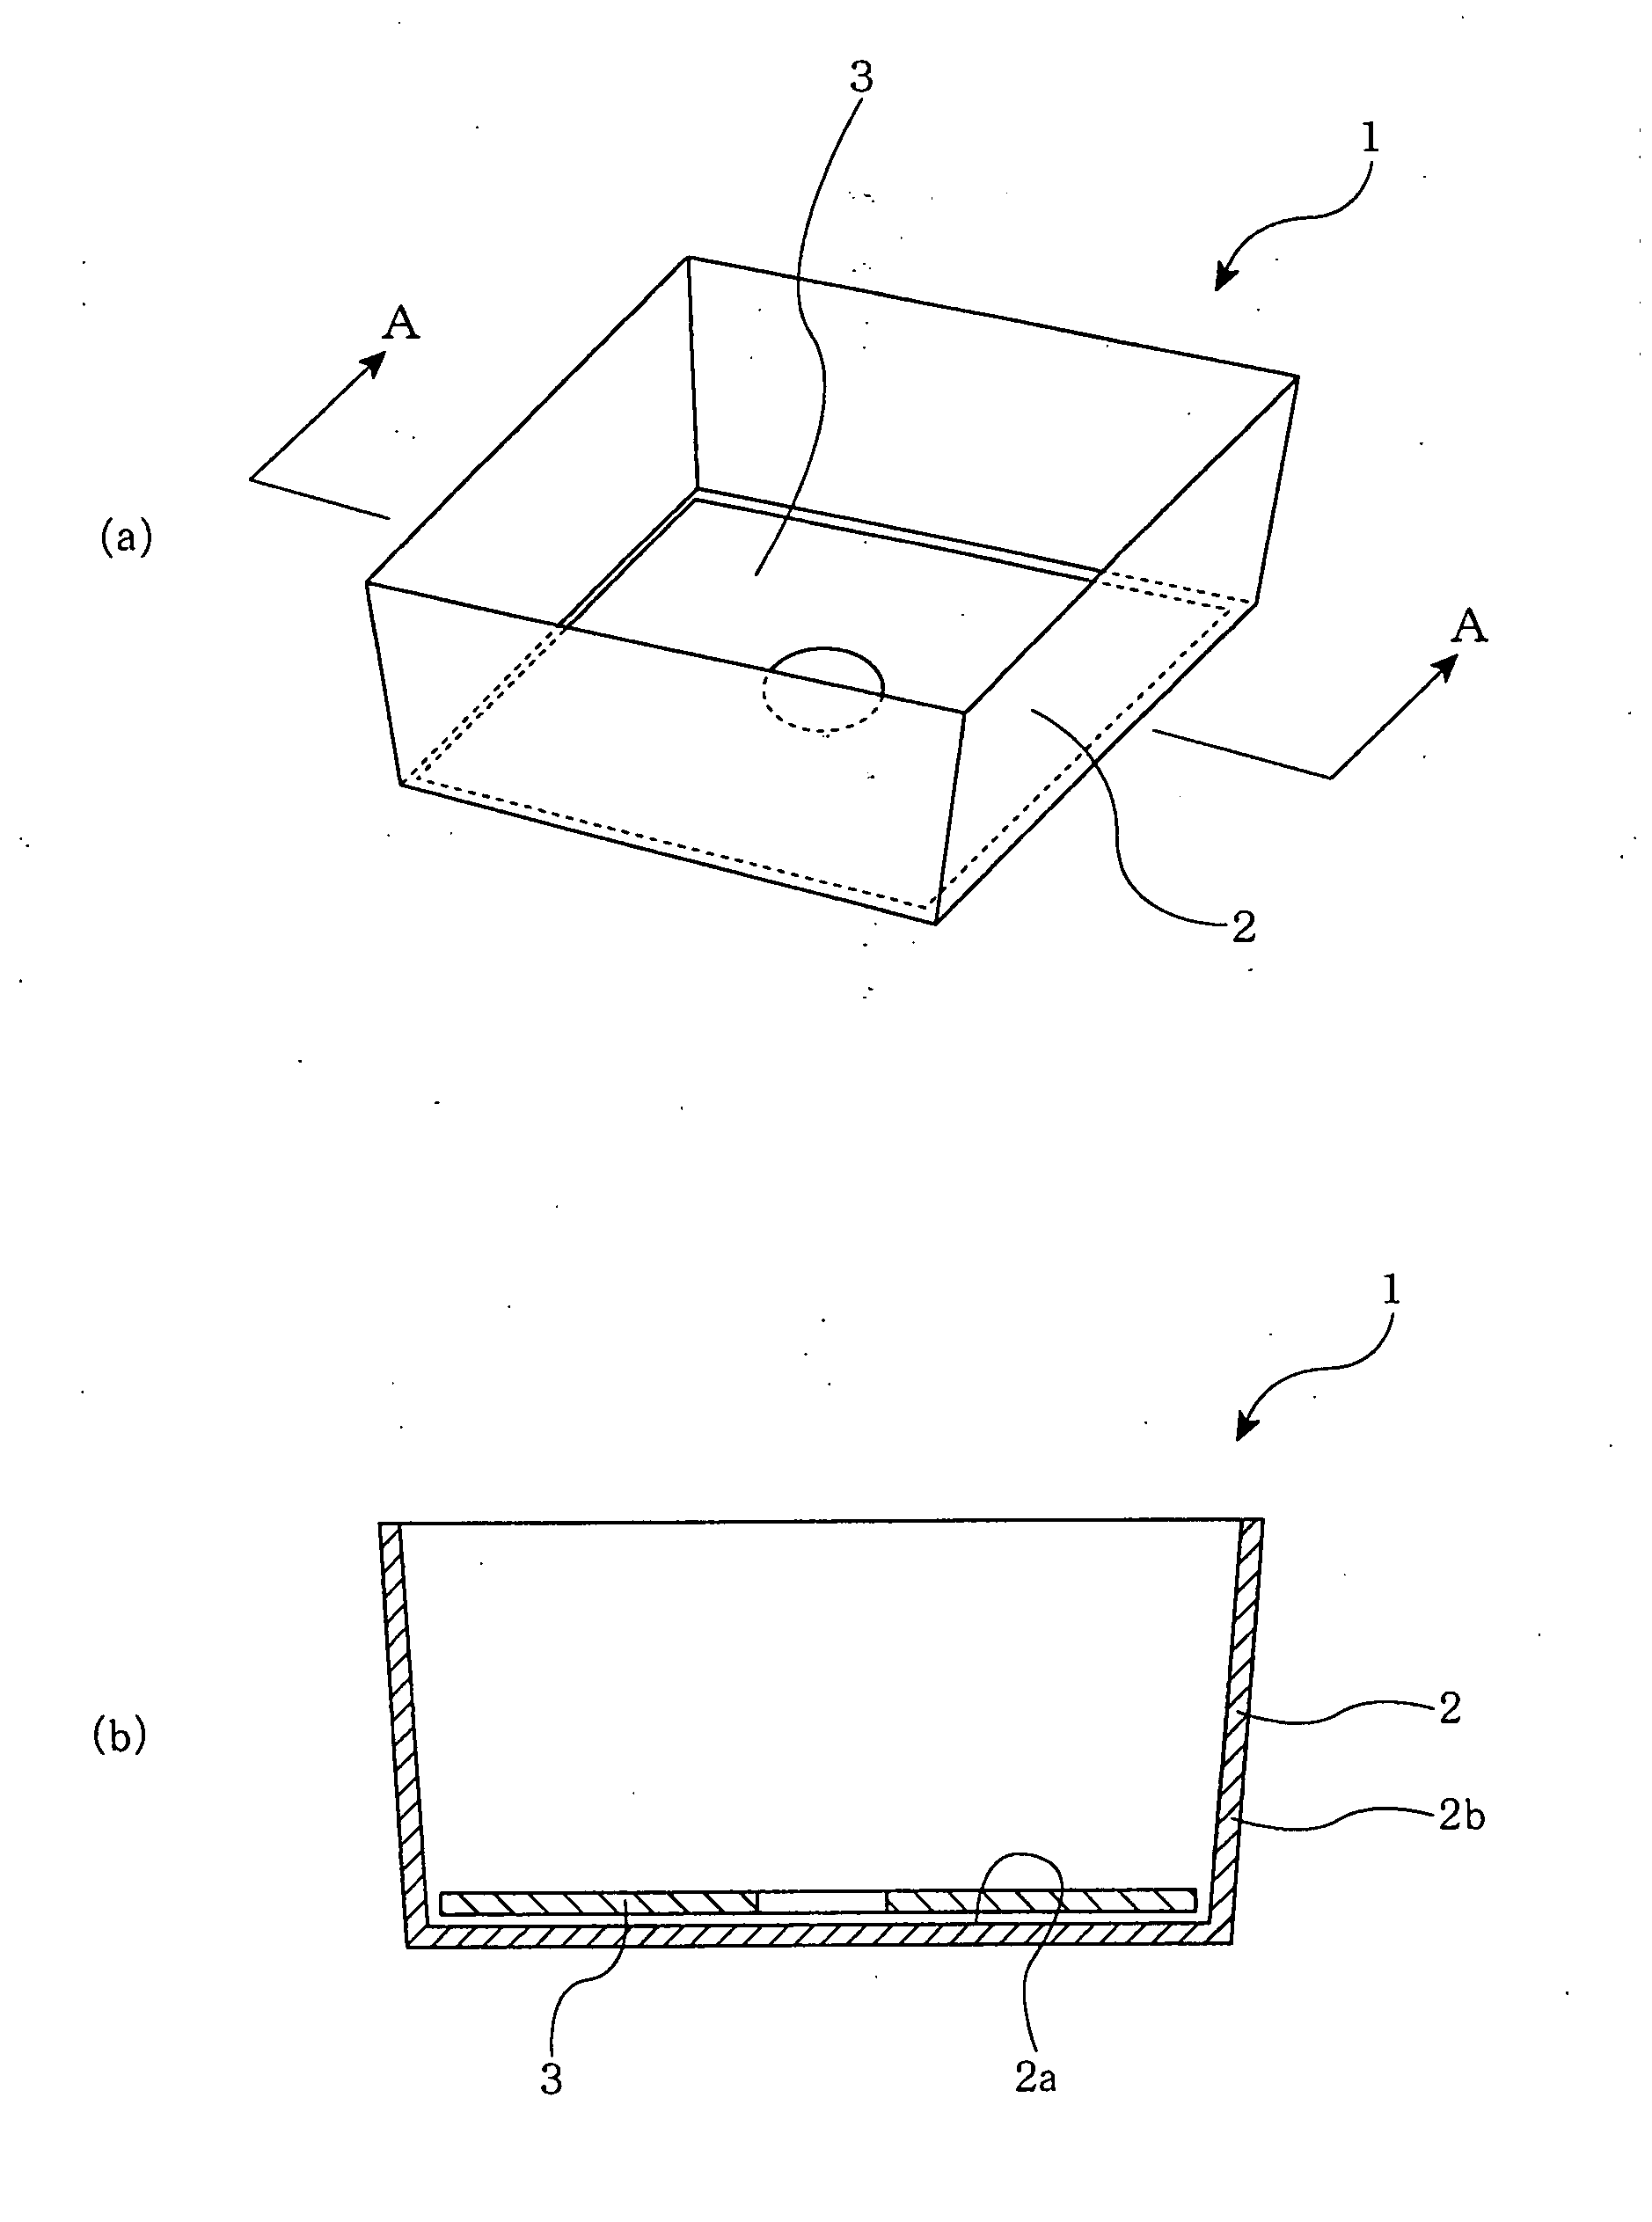 Induction heating body and indcution heating container